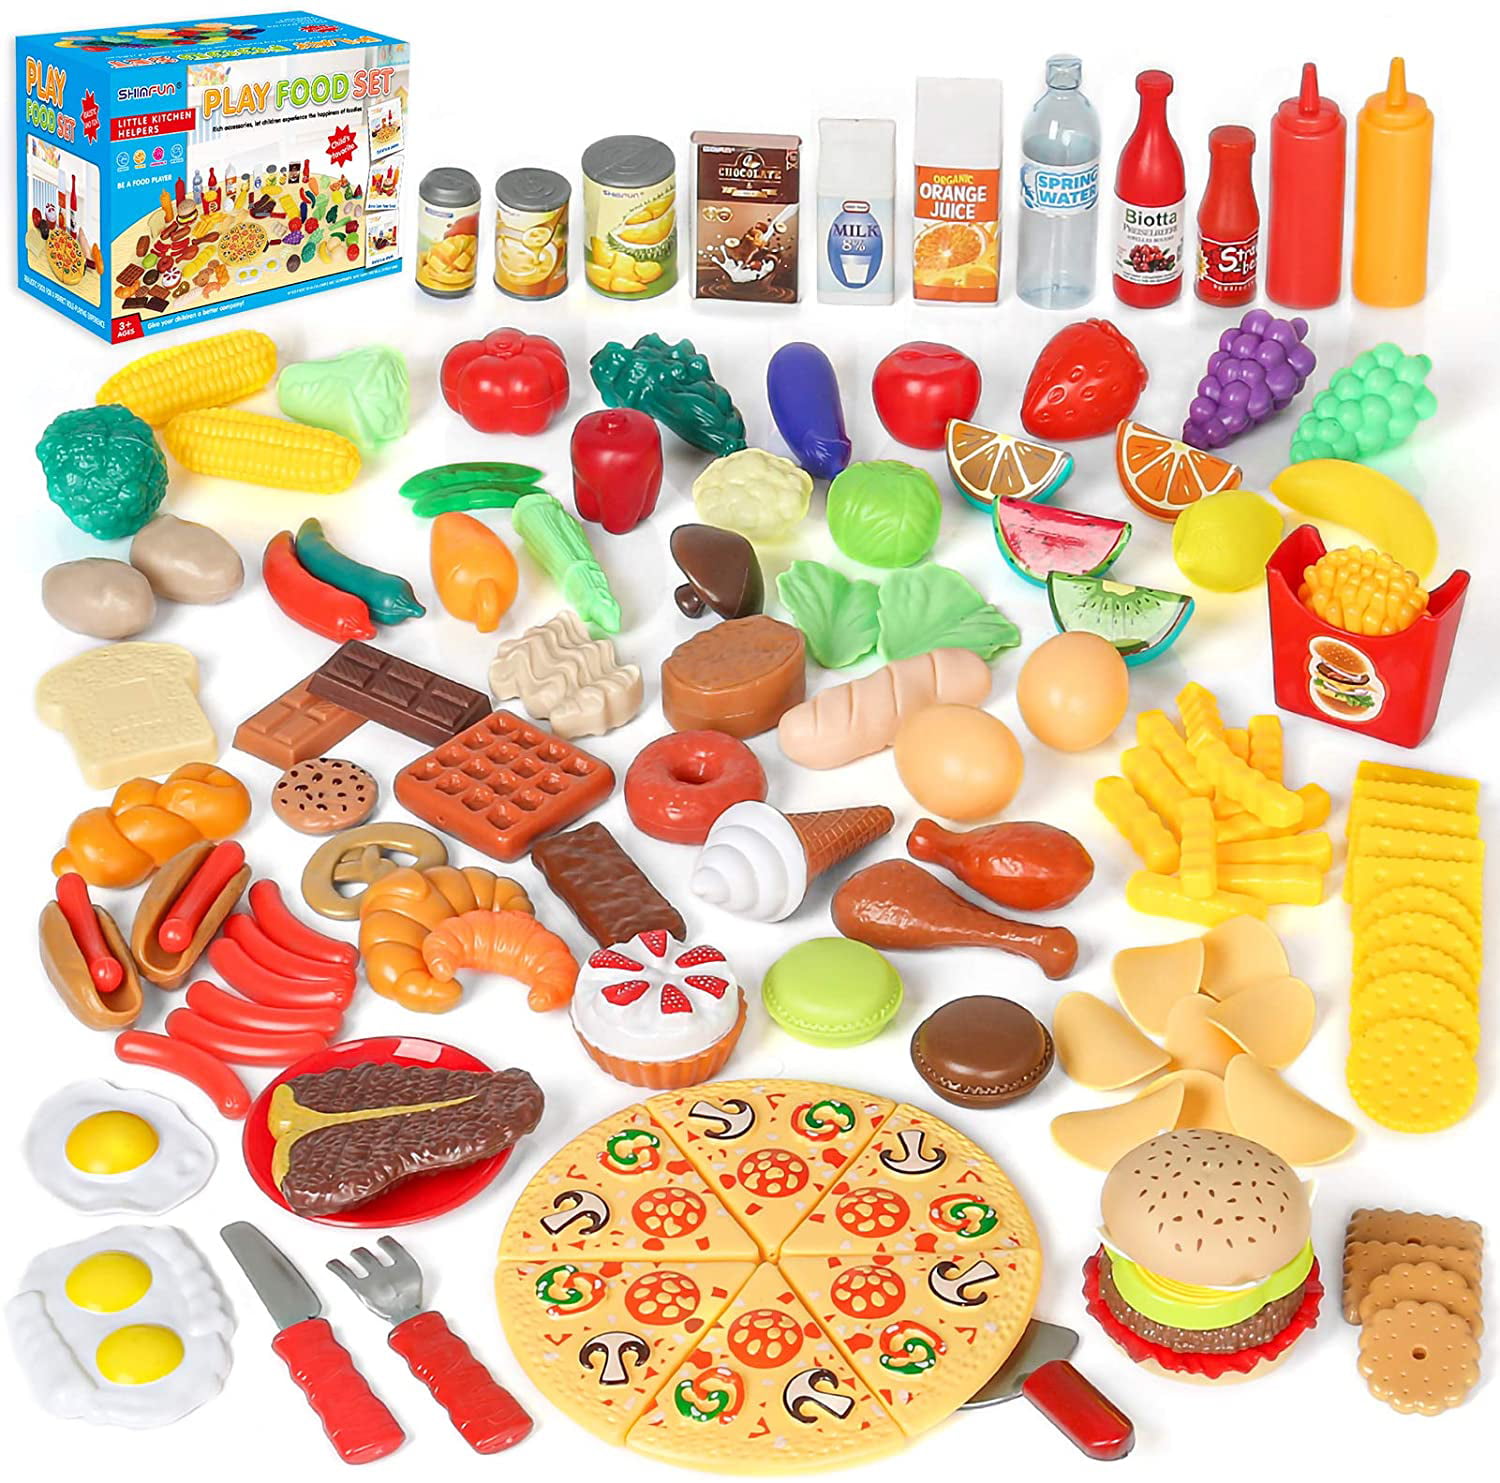 Pretend Play Kitchen Sets For Kids Cooking Food Toy Fun Playset Girls & Boy Toys 